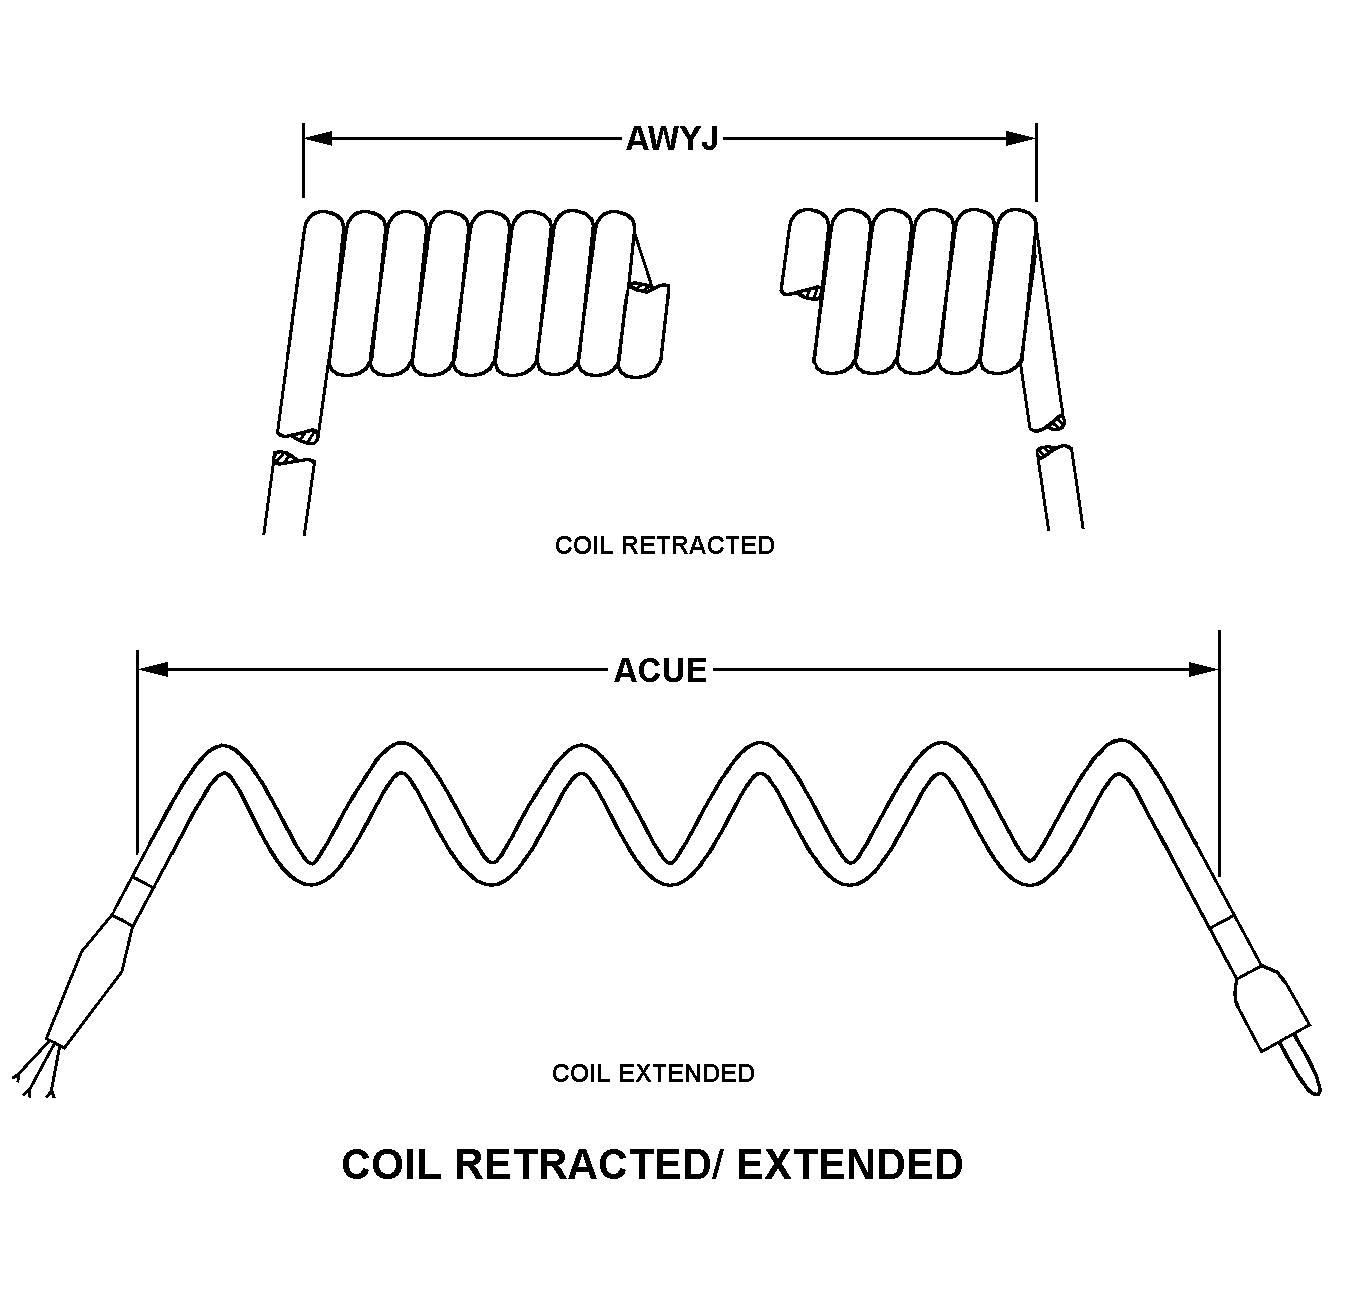 COIL RETRACTED/EXTENDED style nsn 6150-01-511-1931